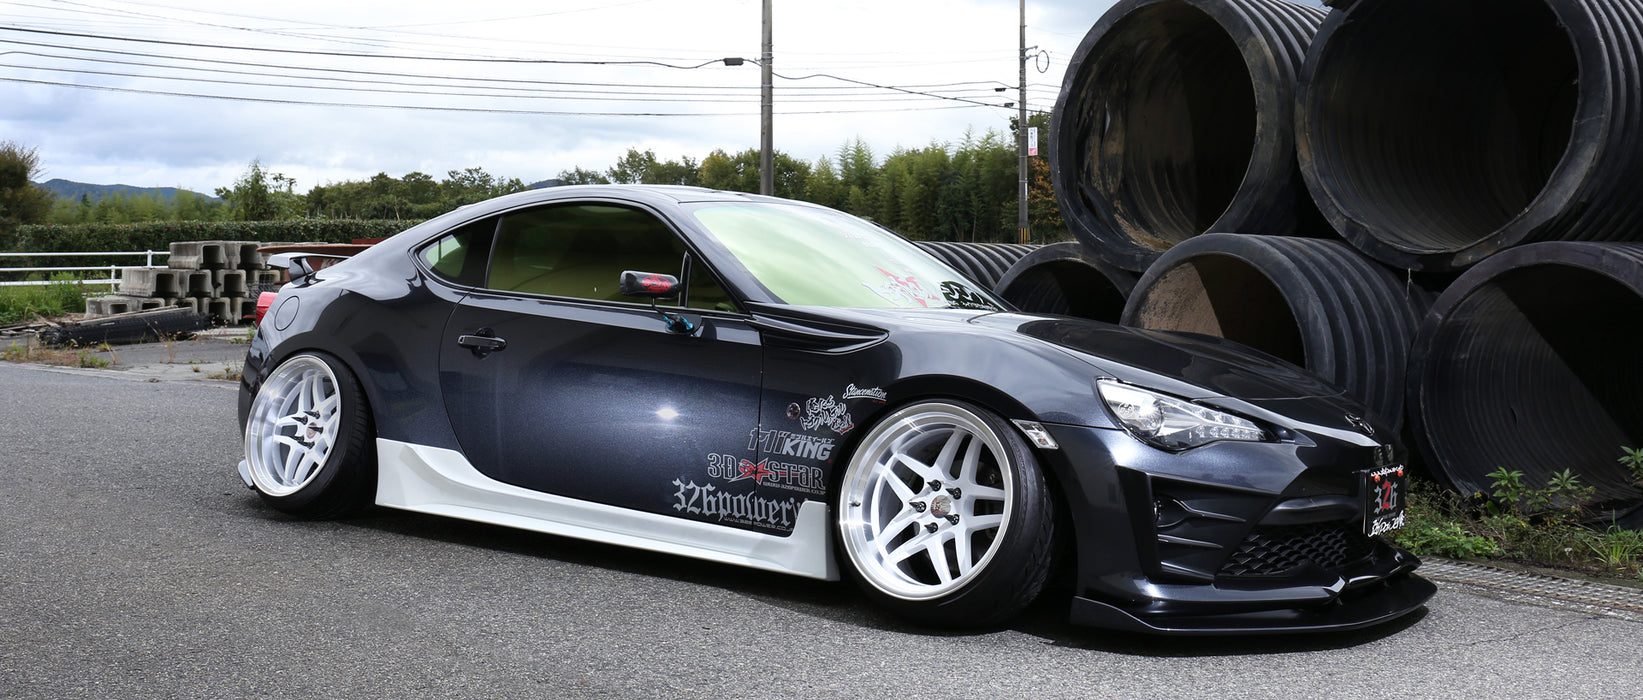 326POWER 3D☆STAR Toyota 86/FRS/BRZ Side Step Type 2 and Universal Side Lip/Lip Type III